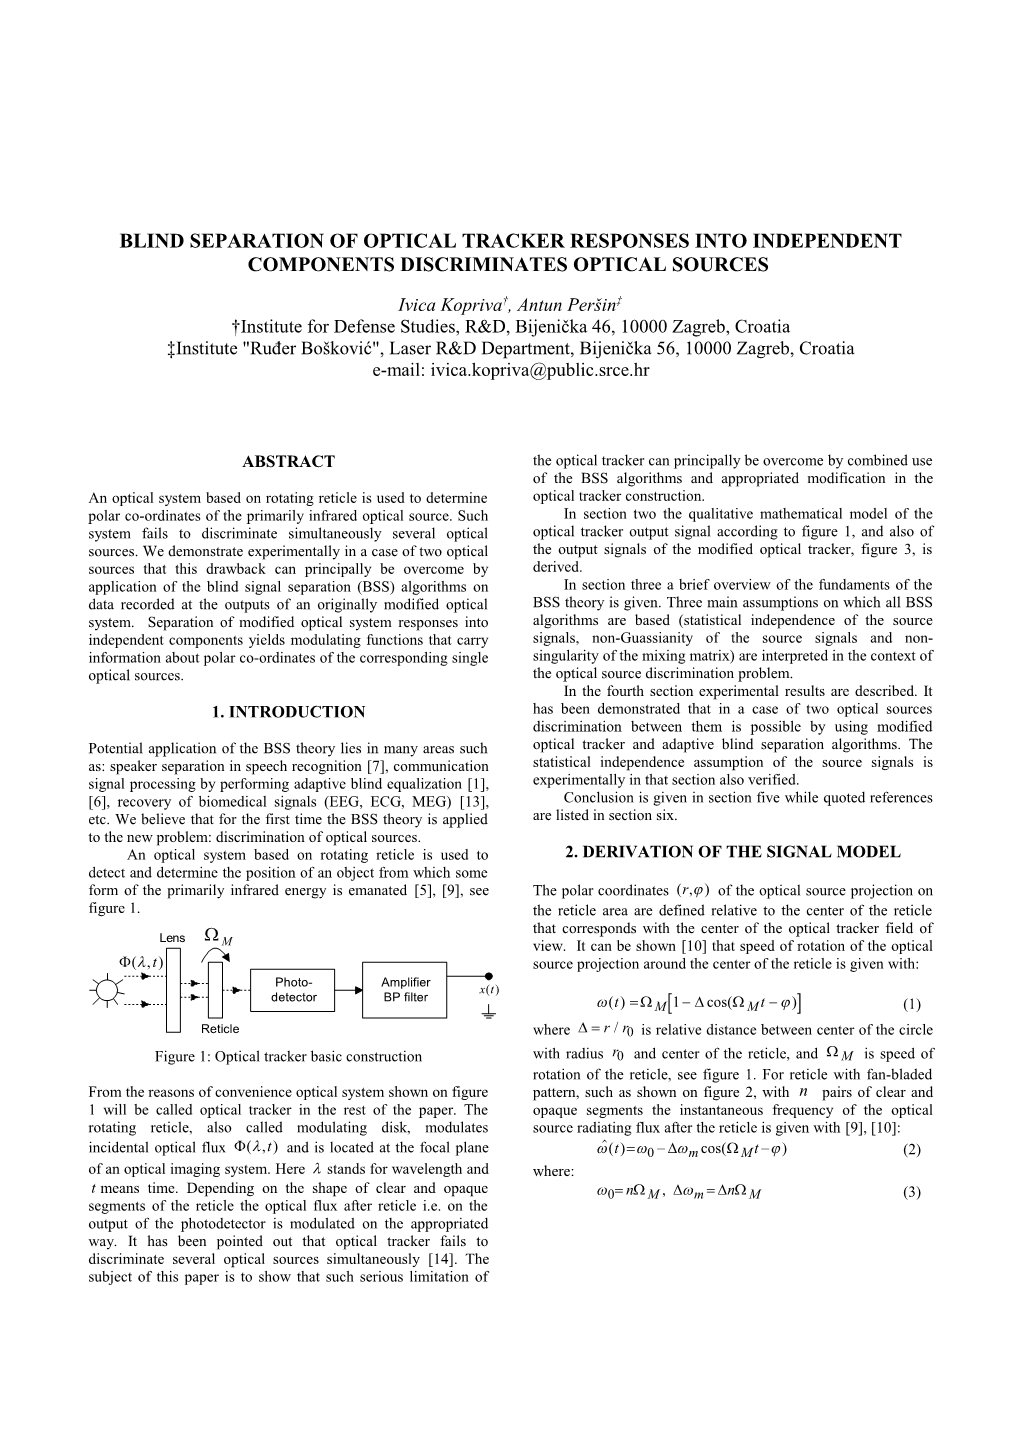 Analytical Solution of the Two Sources Separation Problem by Using Fourth-Order Cross-Cumulants